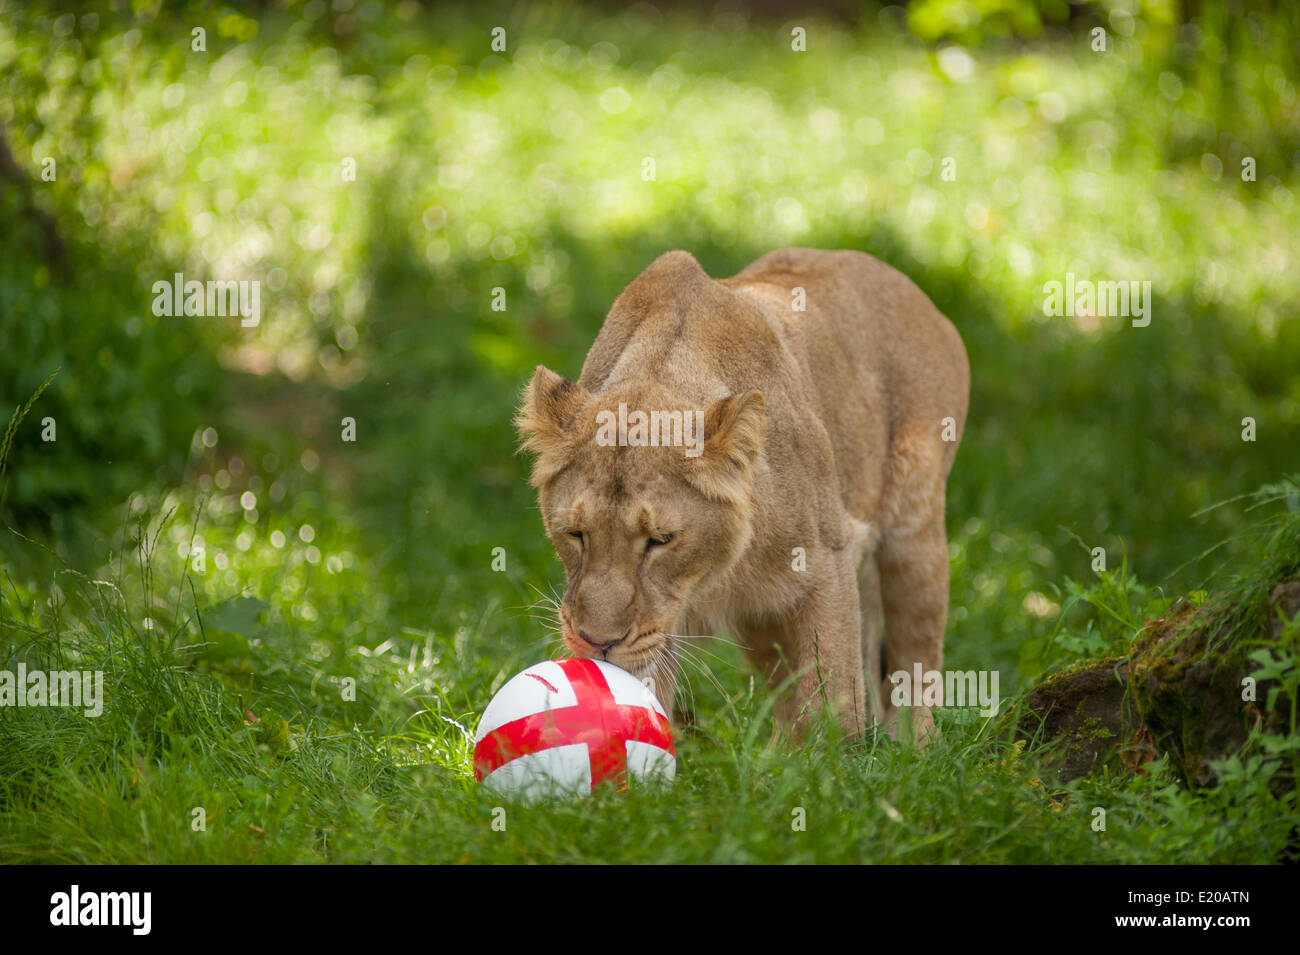 London Zoo, Regent’s Park, London UK. 12th June 2014. ZSL London Zoo’s three Asian lionesses try their ball skills for the England team as the World Cup kicks off. Lions have been mascots of the England football shirt since 1872. Credit:  Malcolm Park editorial/Alamy Live News Stock Photo